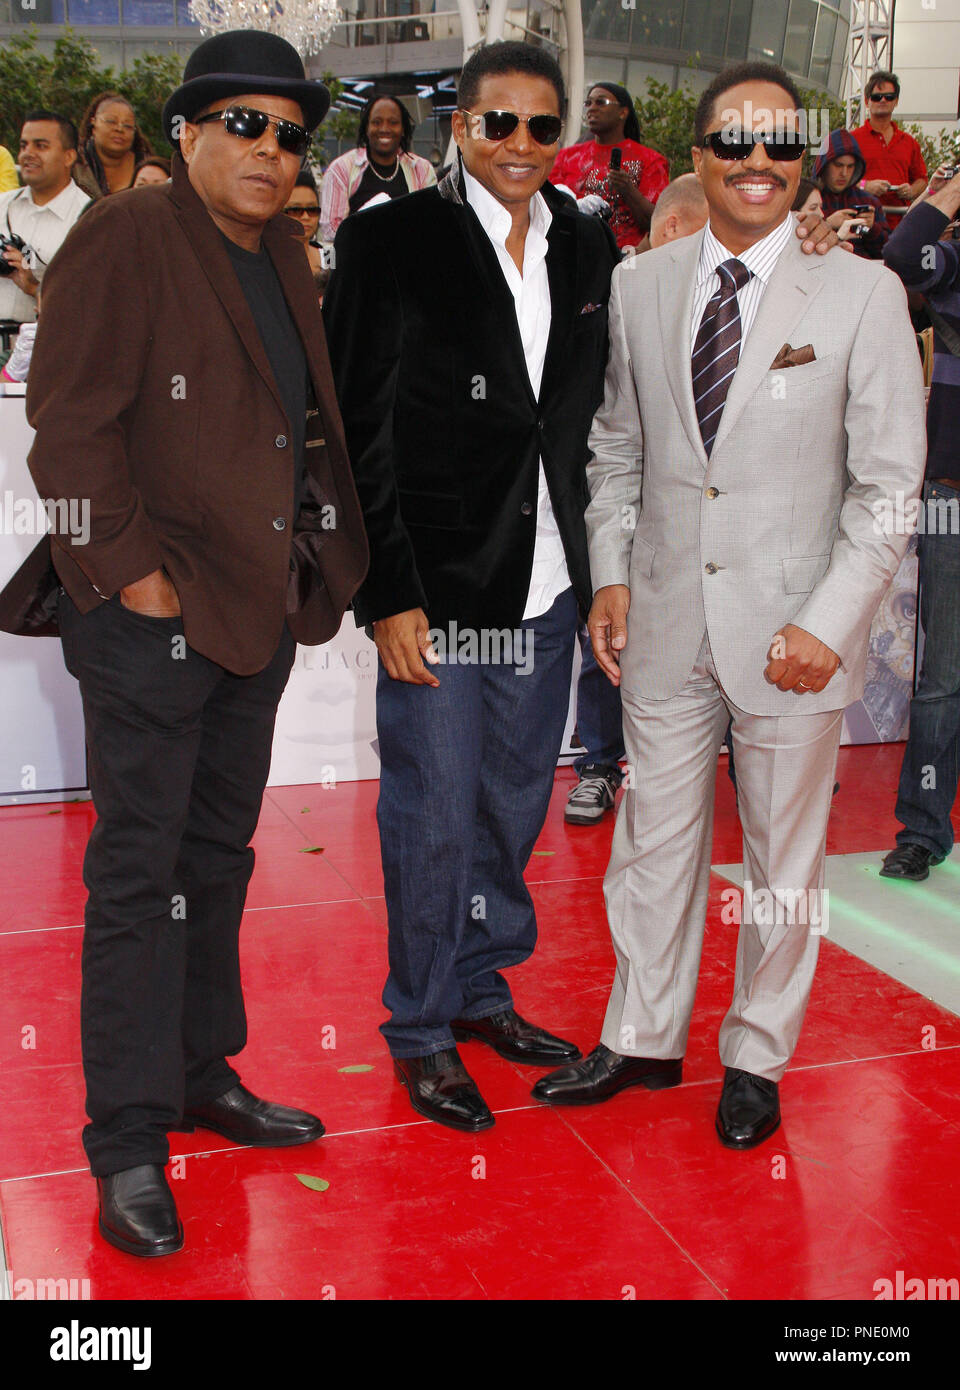 Tito Jackson, Marlon Jackson & Jackie Jackson arriving at the Los Angeles Premiere of Michael Jackson's 'This Is It' held at the NOKIA Theatre in Los Angeles, CA. The event took place on Tuesday, October 27, 2009. Photo by: Pedro Ulayan Pacific Rim Photo Press.  / PictureLux File Reference # TitoJackson MarlonJackson JackieJackson 102709 5PRPP   For Editorial Use Only -  All Rights Reserved Stock Photo